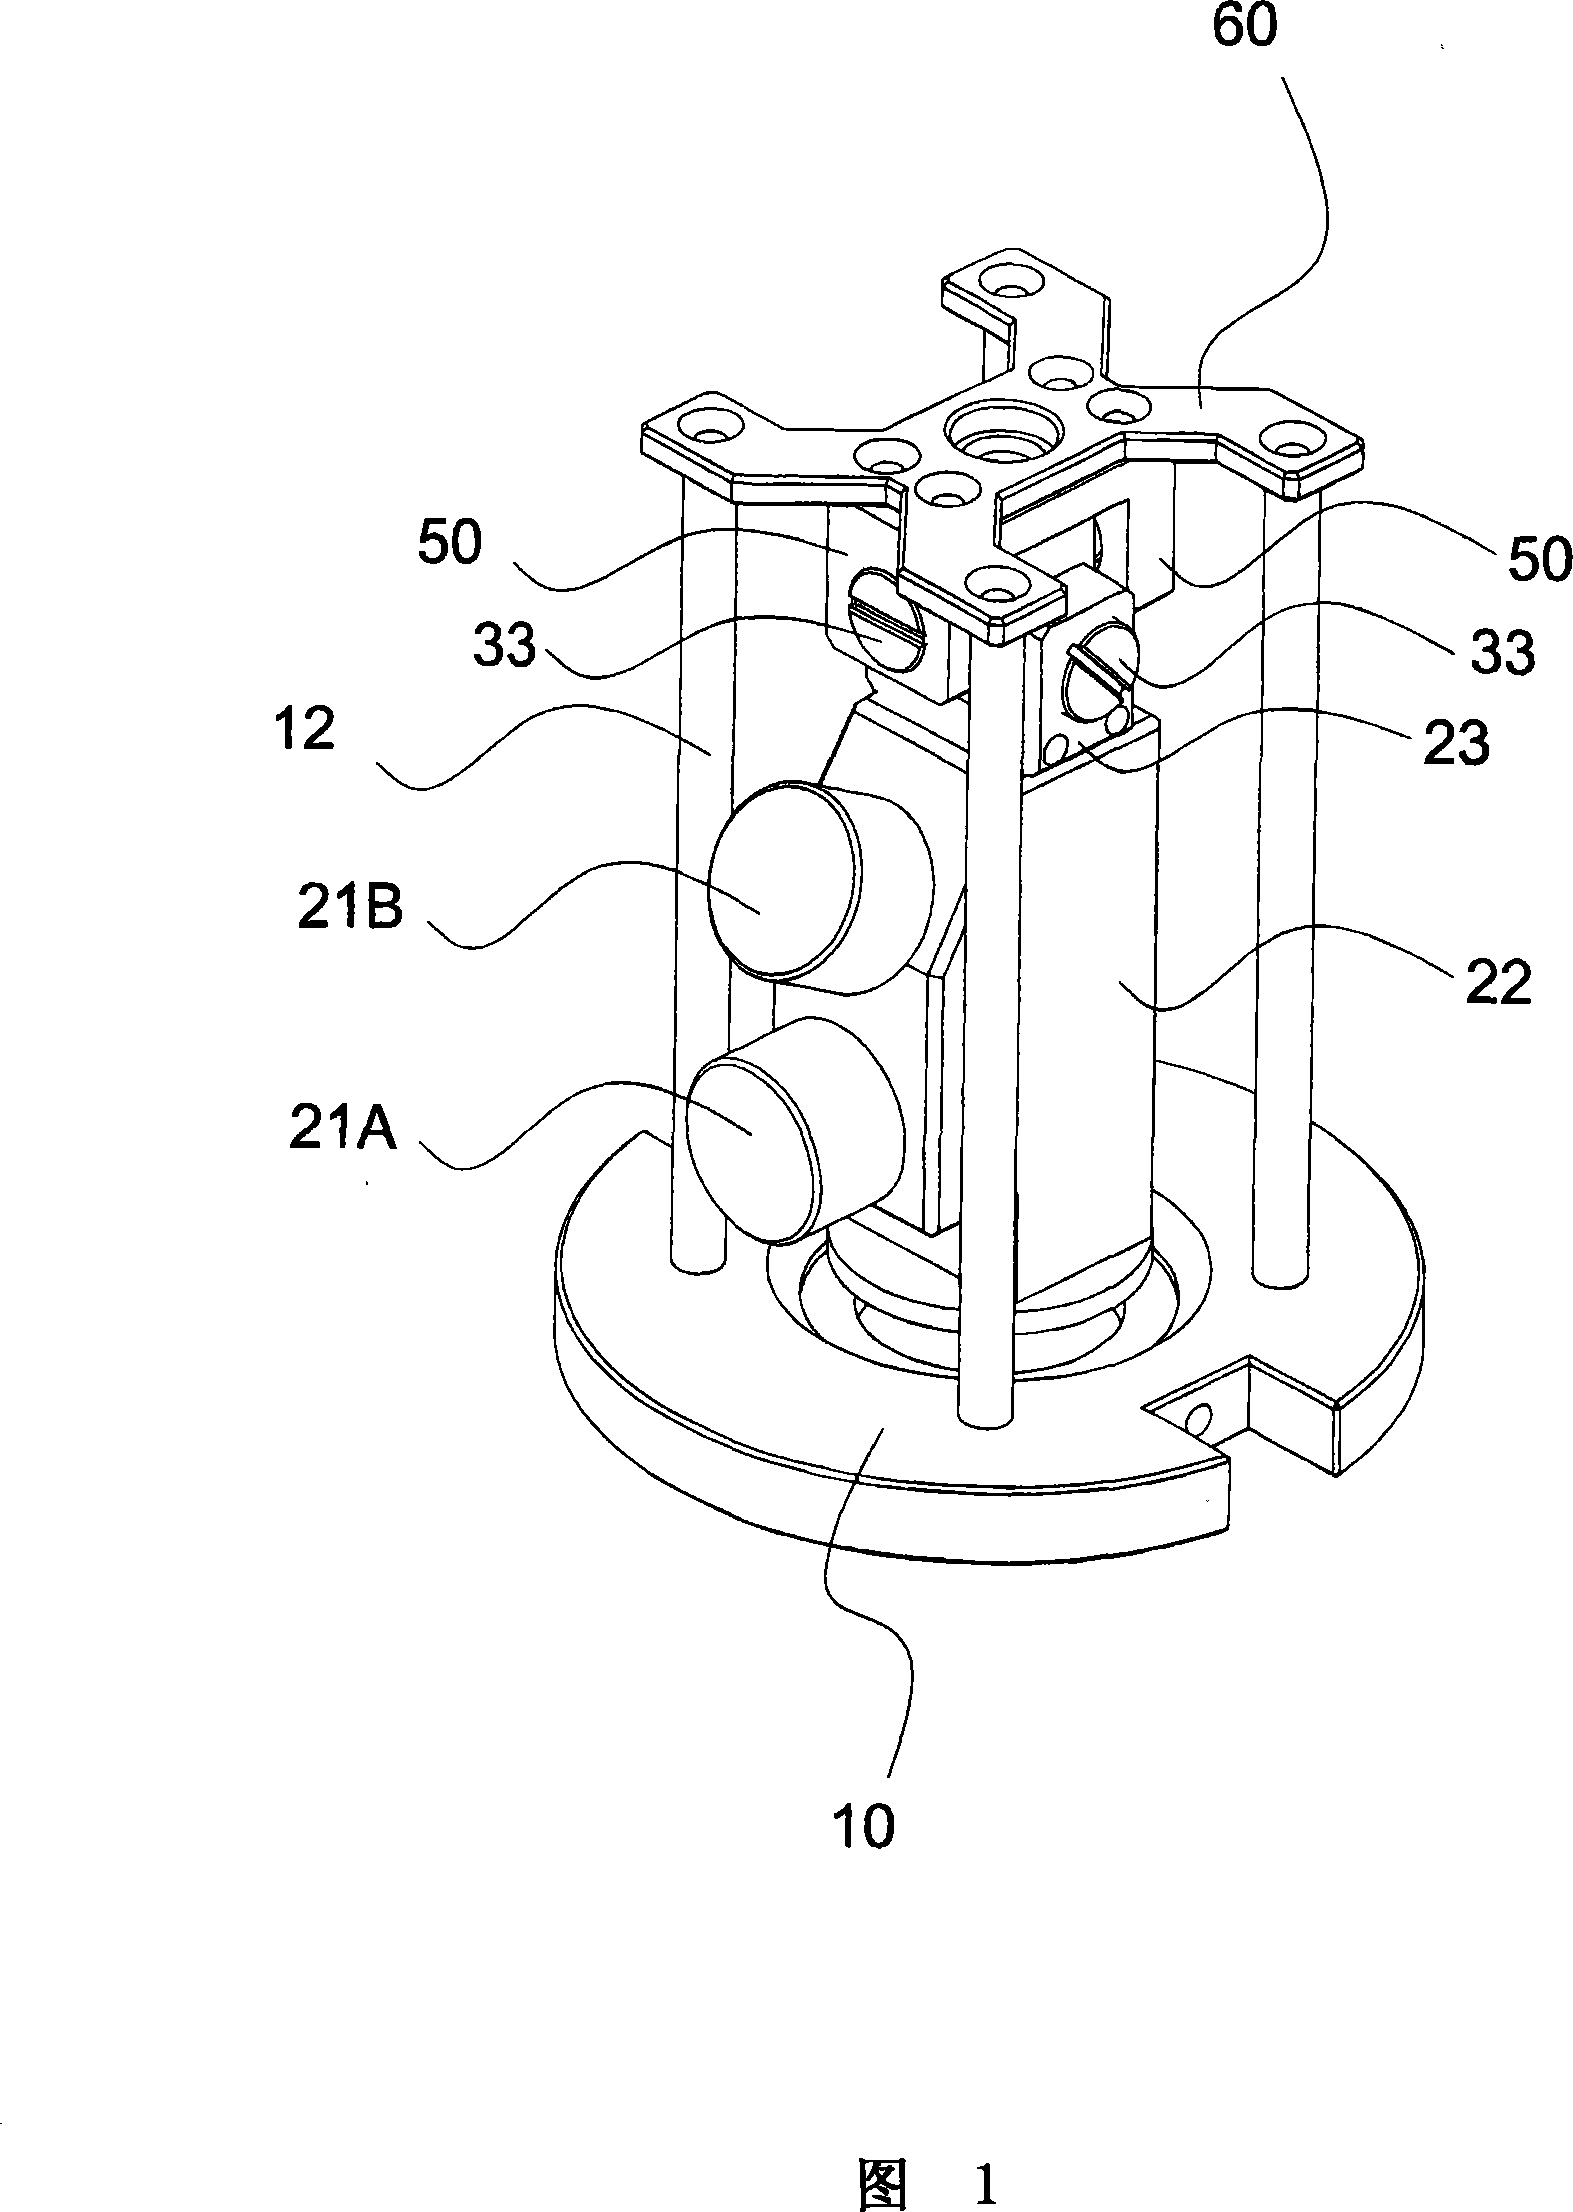 Axial direction free spin device